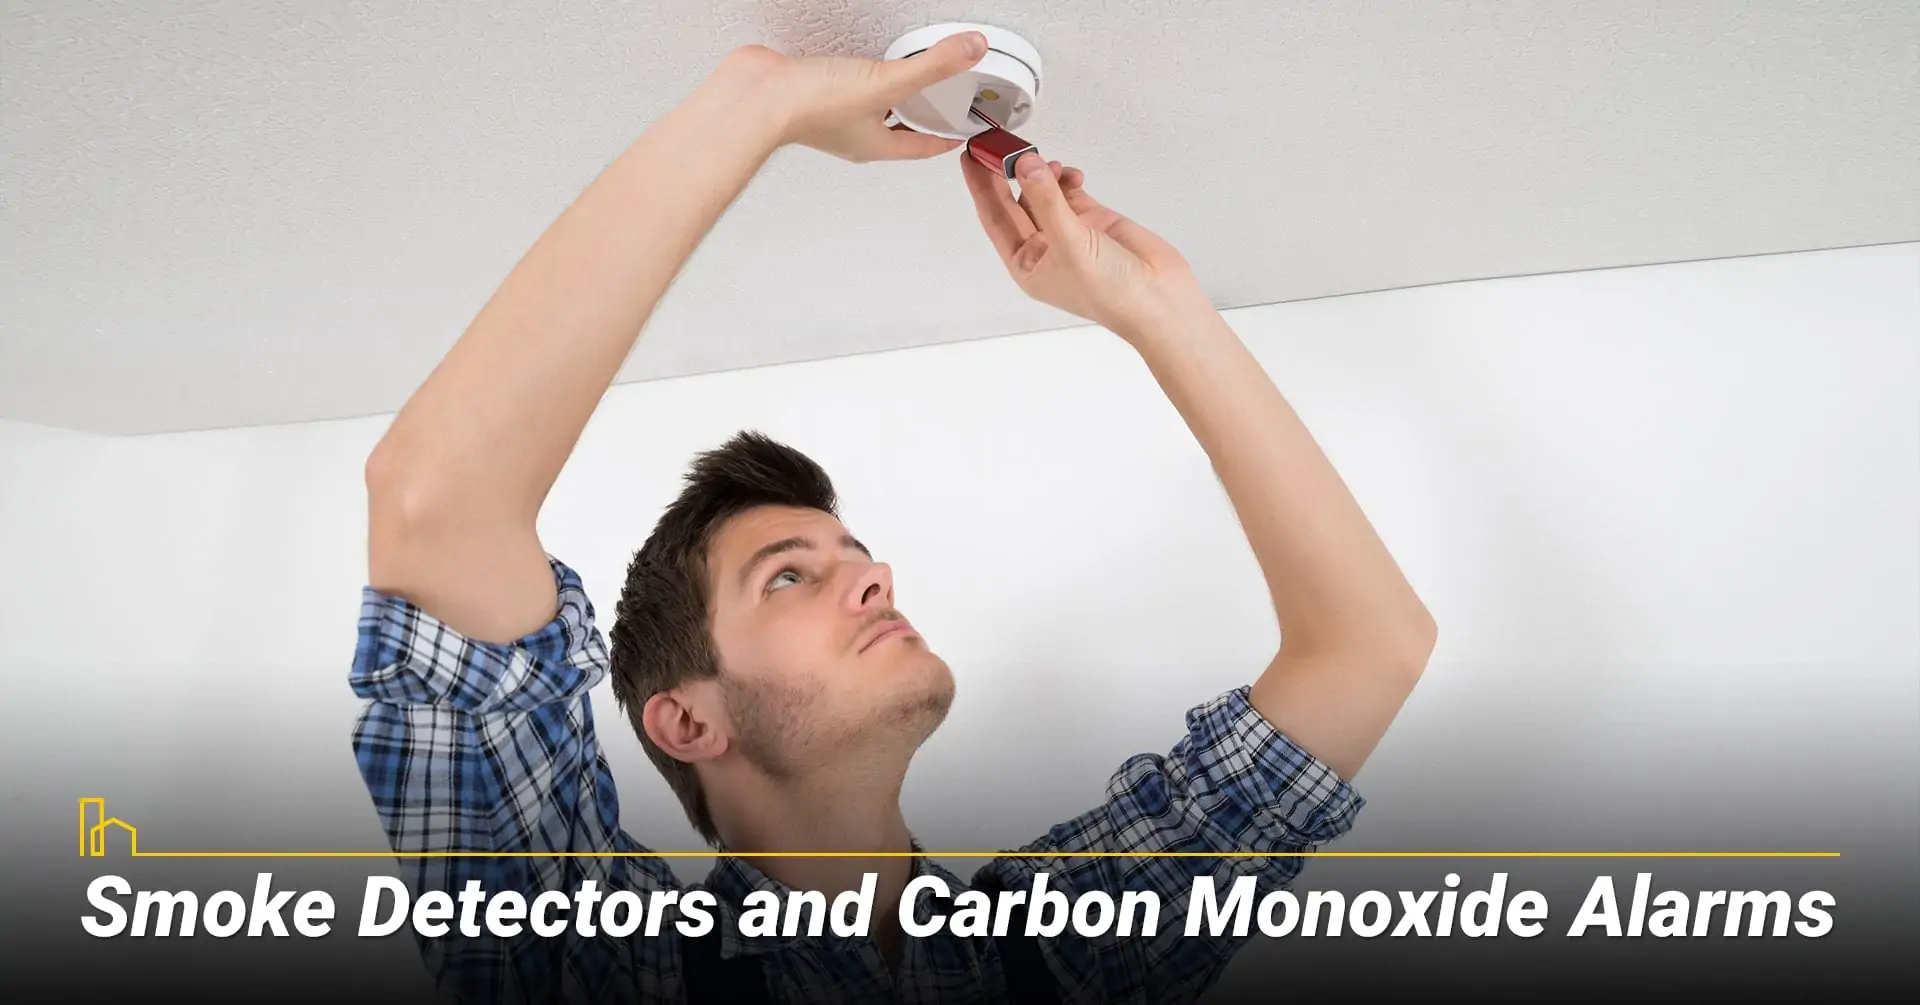 Smoke Detectors and Carbon Monoxide Alarms, ensure your Smoke Detectors and Carbon Monoxide Alarms work properly